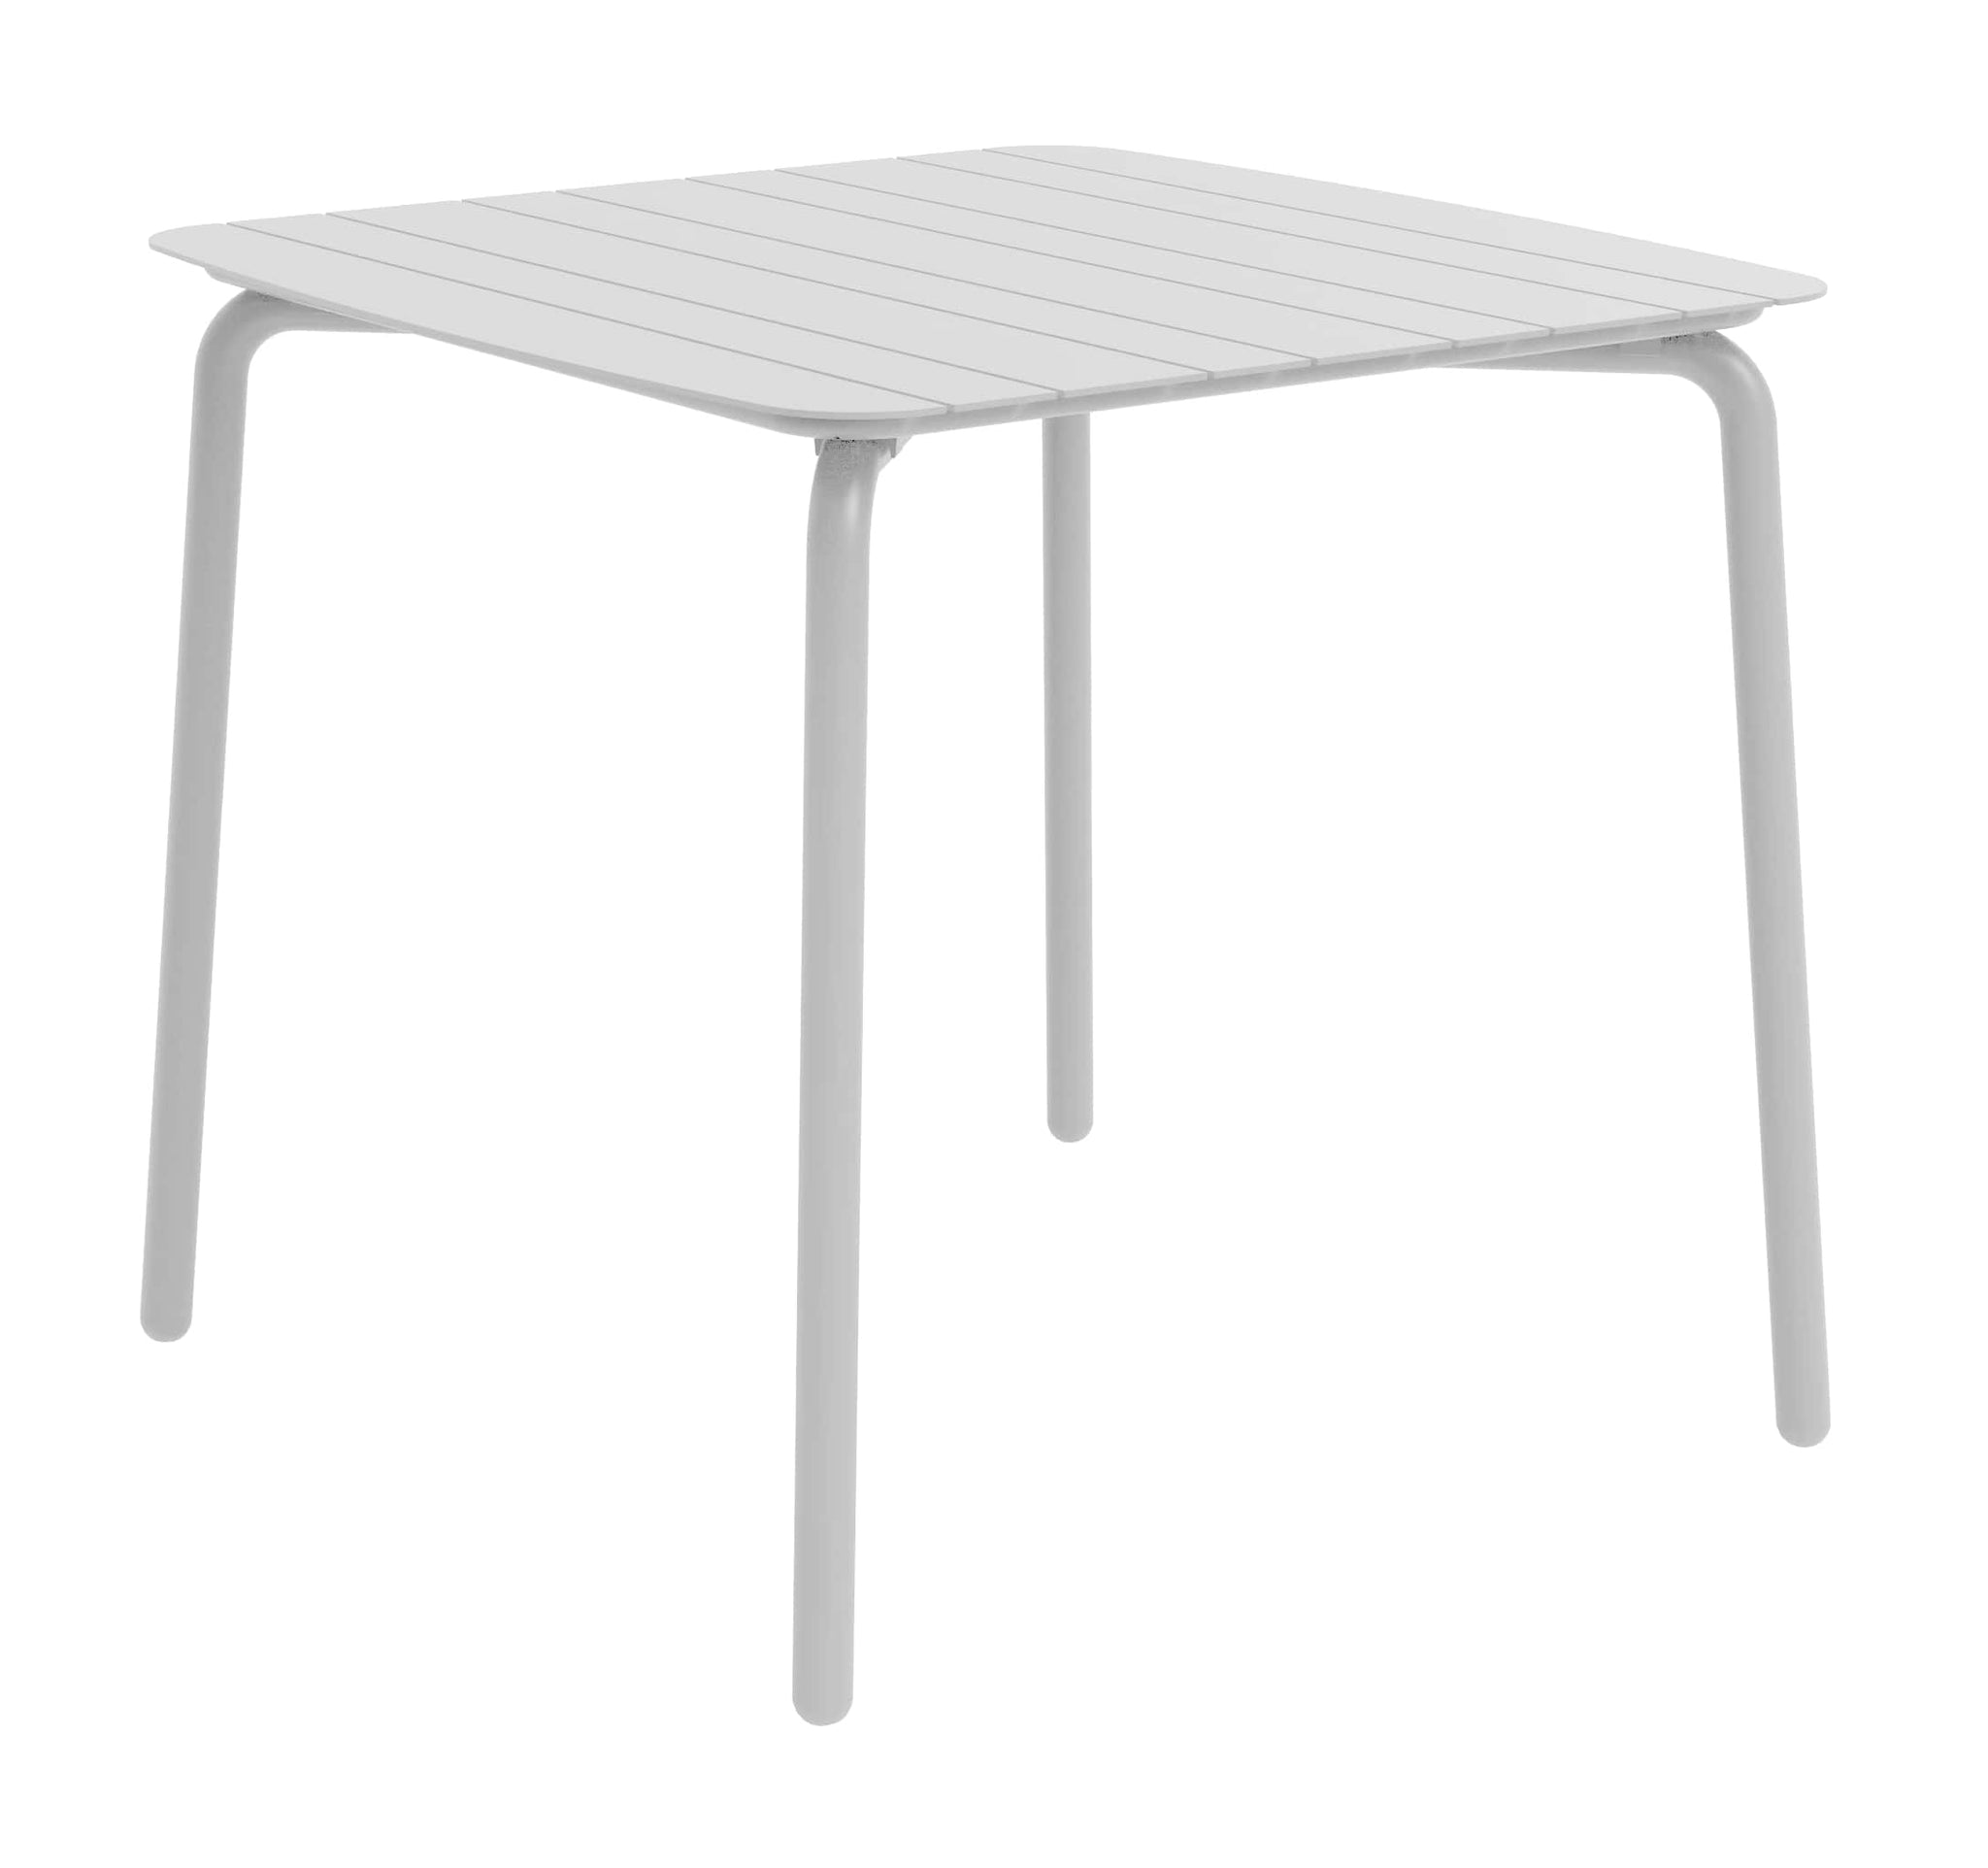 Table Perfect 82 x 82